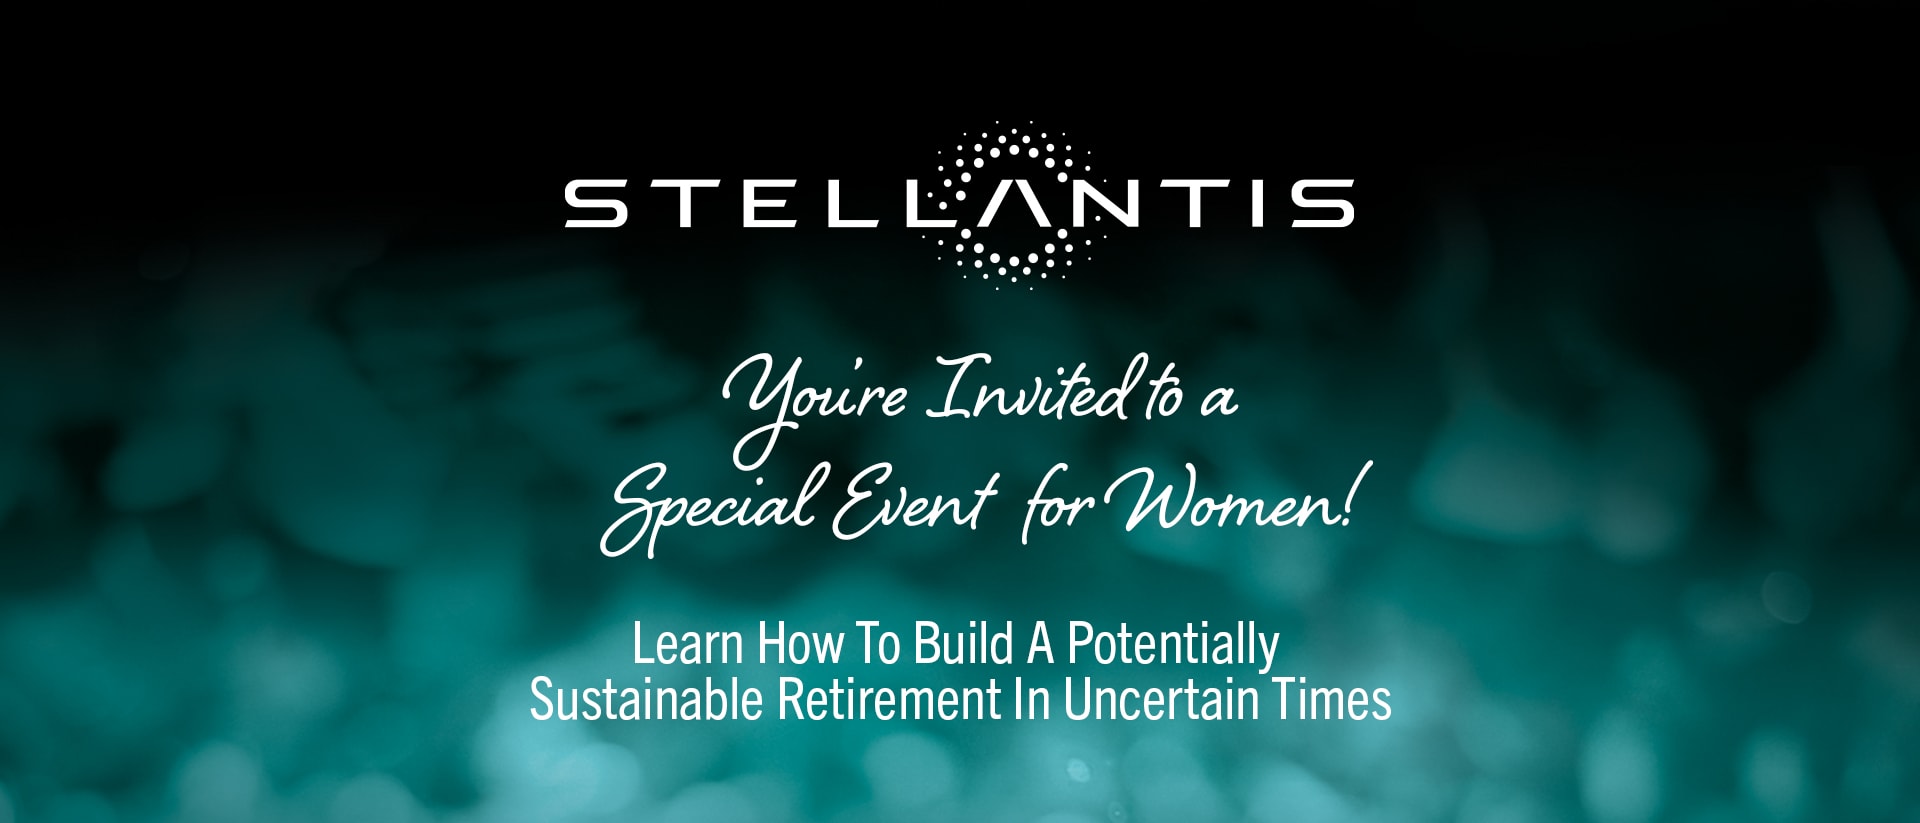 stellantis event with cindy couyoumjian